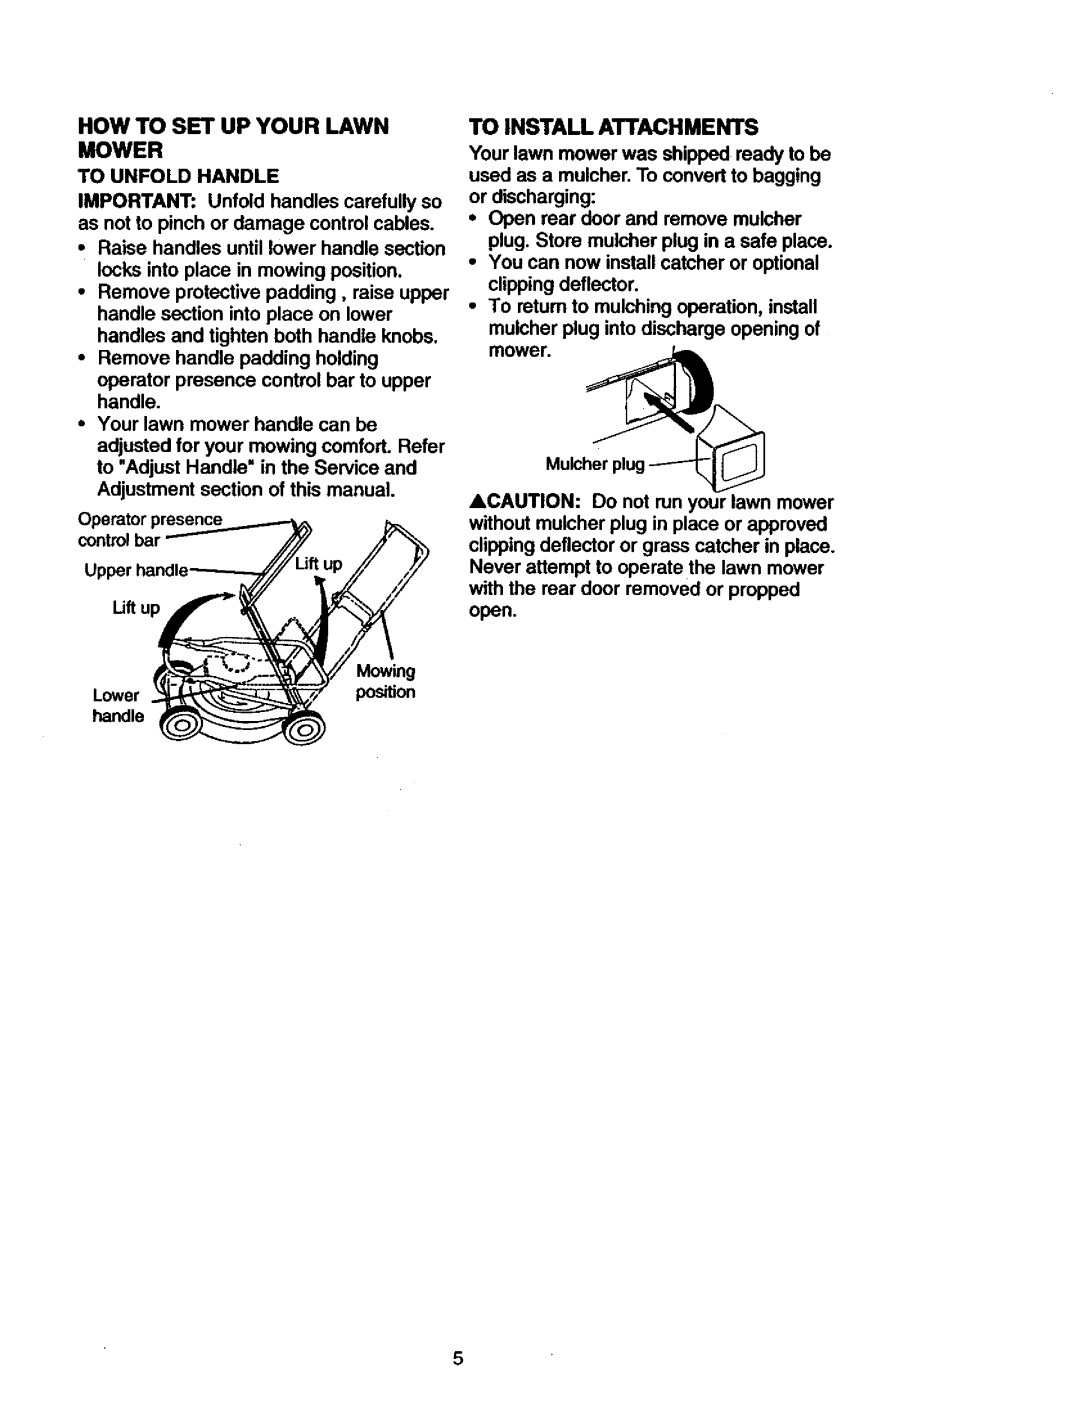 Craftsman 917.377582 owner manual How To Set Up Your Lawn Mower, To Install Attachments 